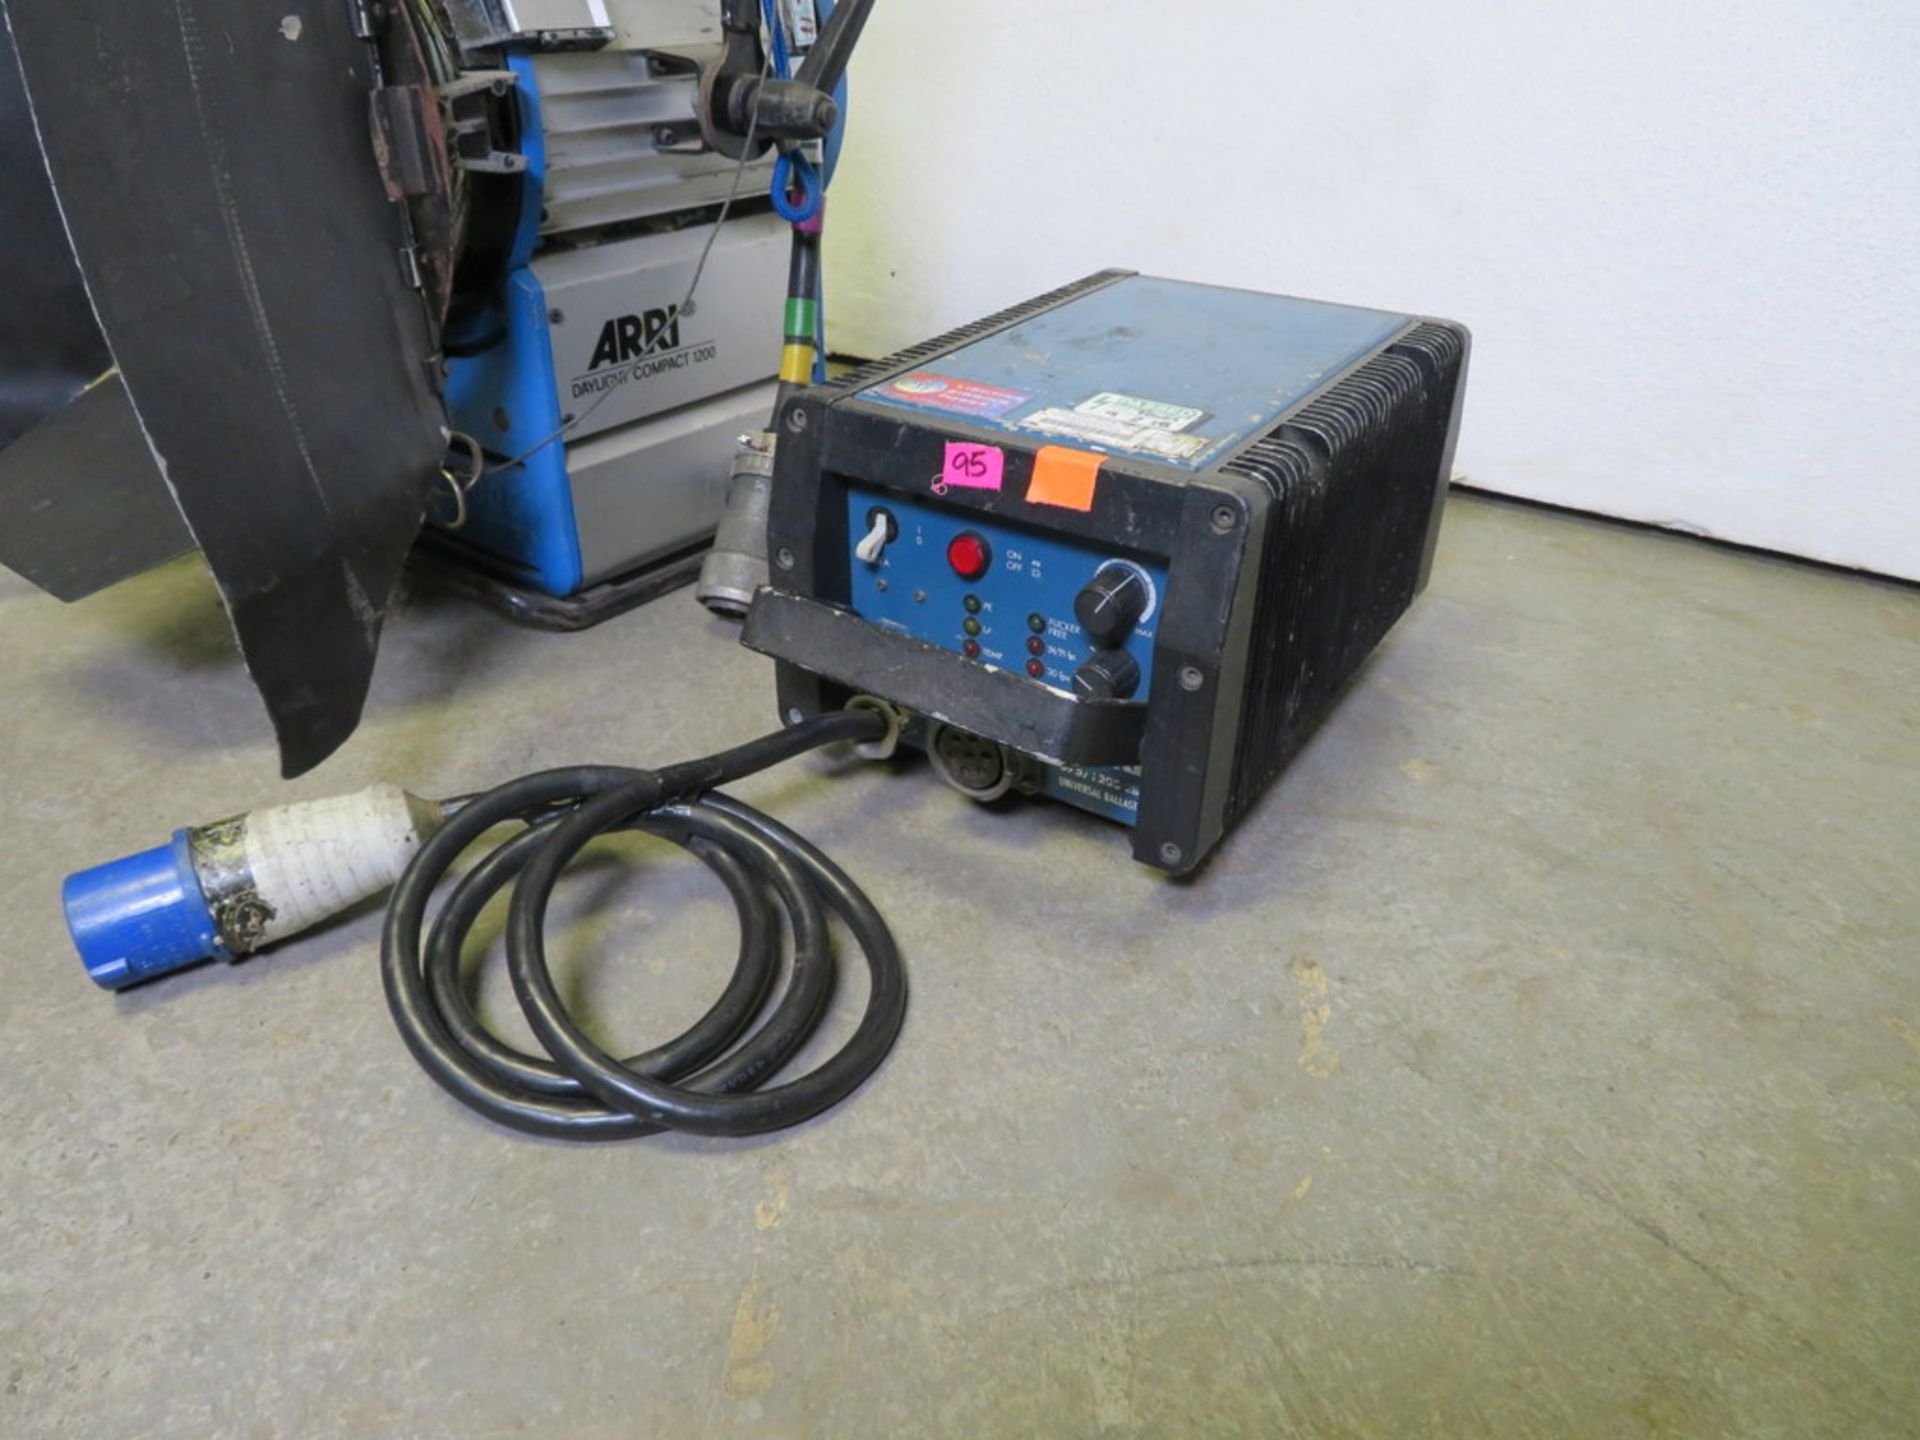 1 x Arri 1.2Kw MSR fresnel c/w electronic ballast & header cable - Image 4 of 5